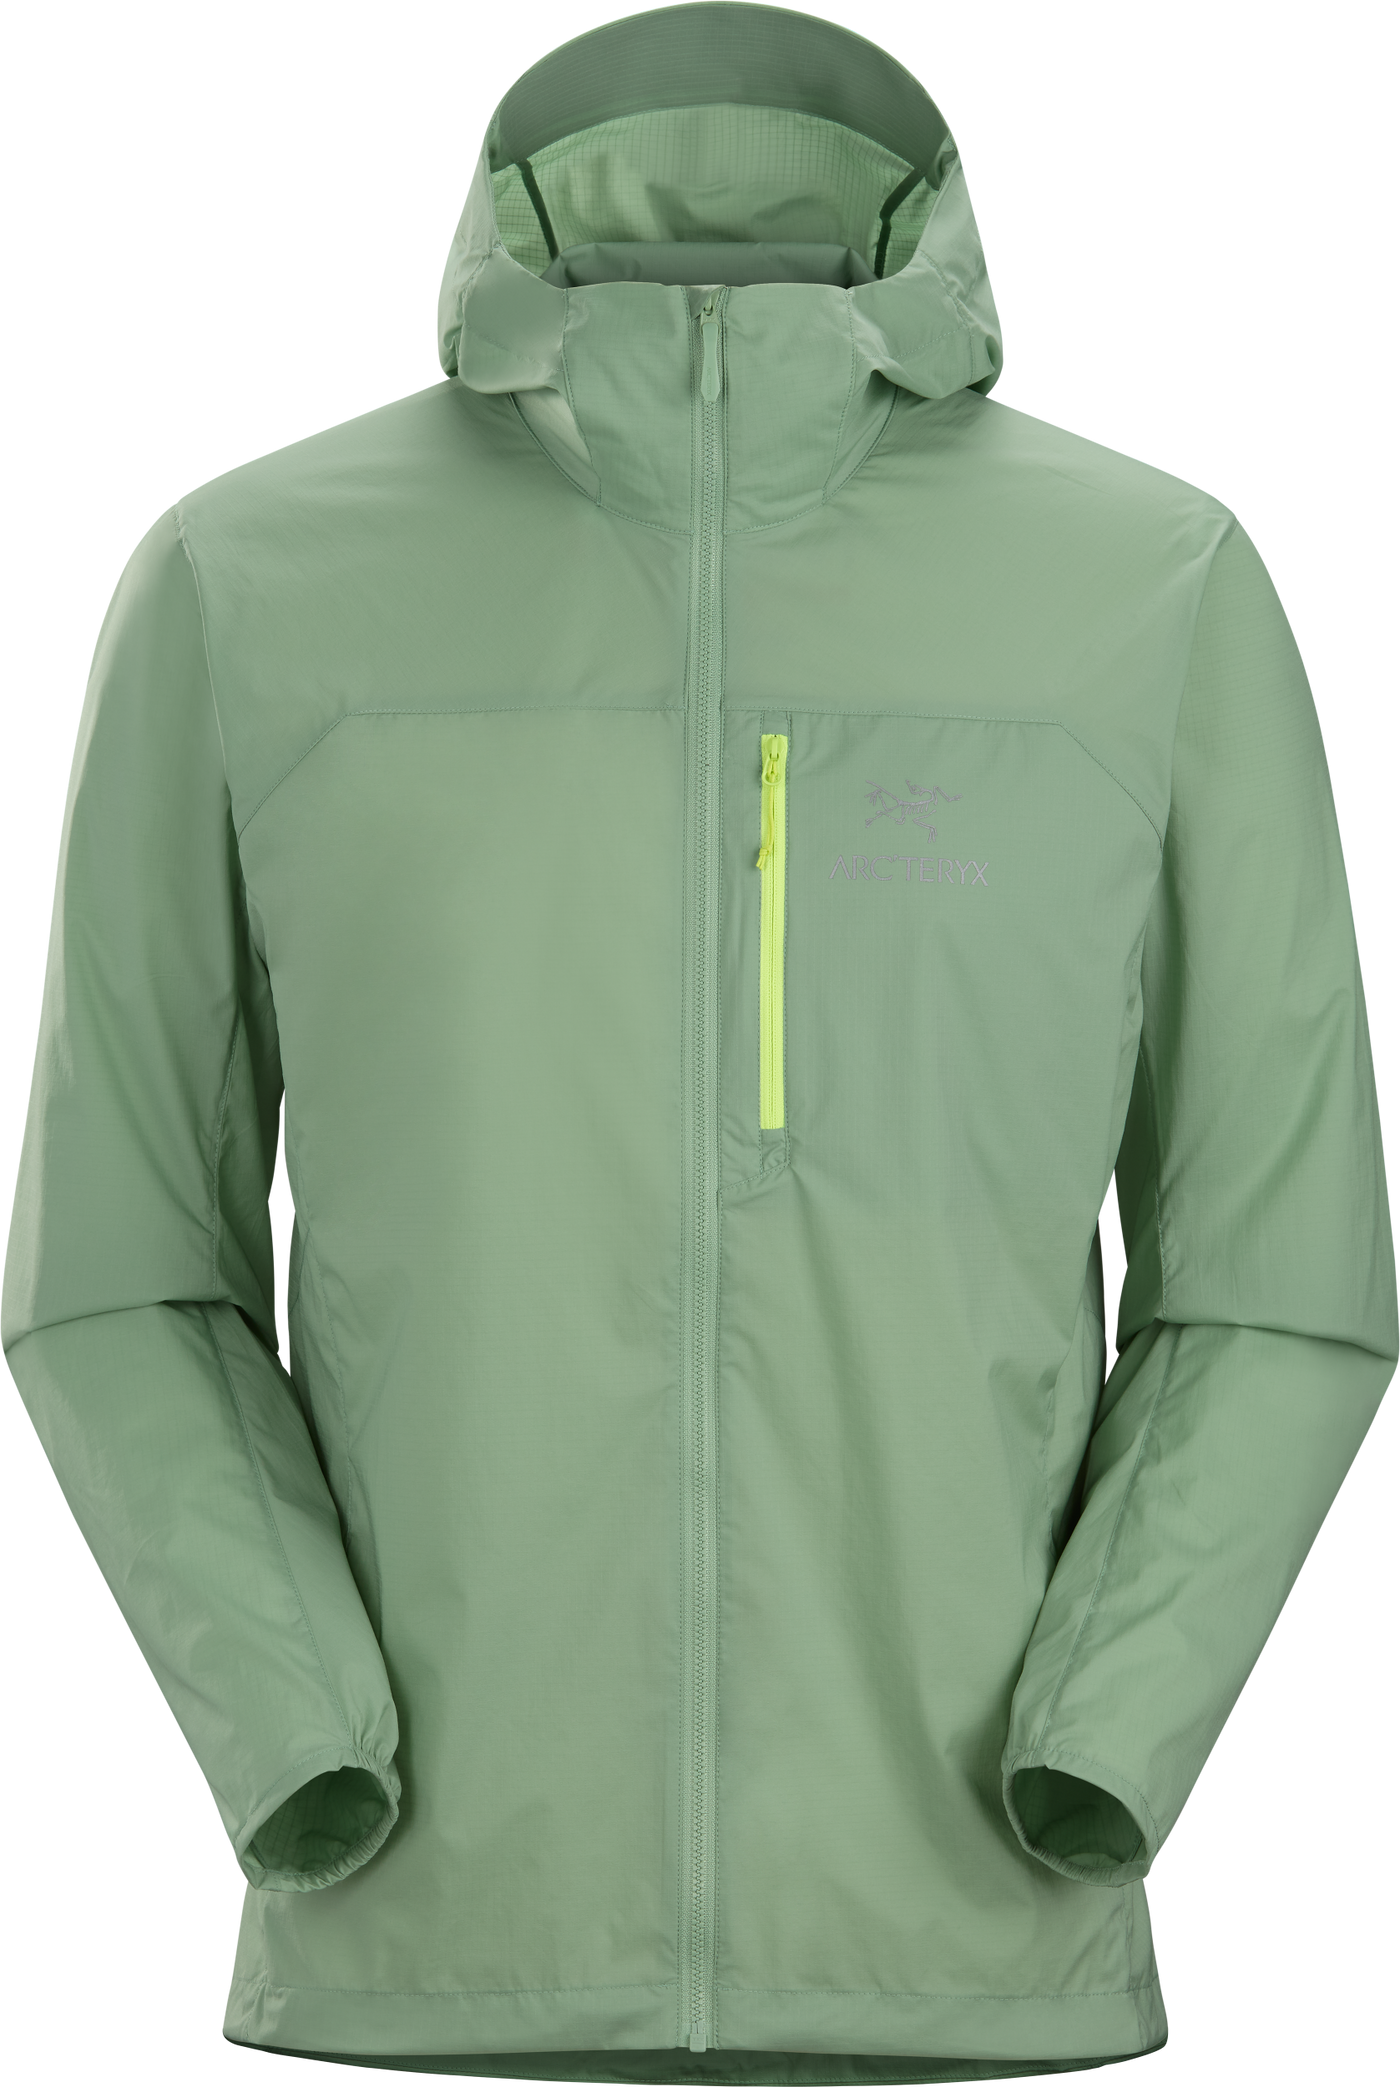 Squamish Hoody Men's S23 – Feathered Friends